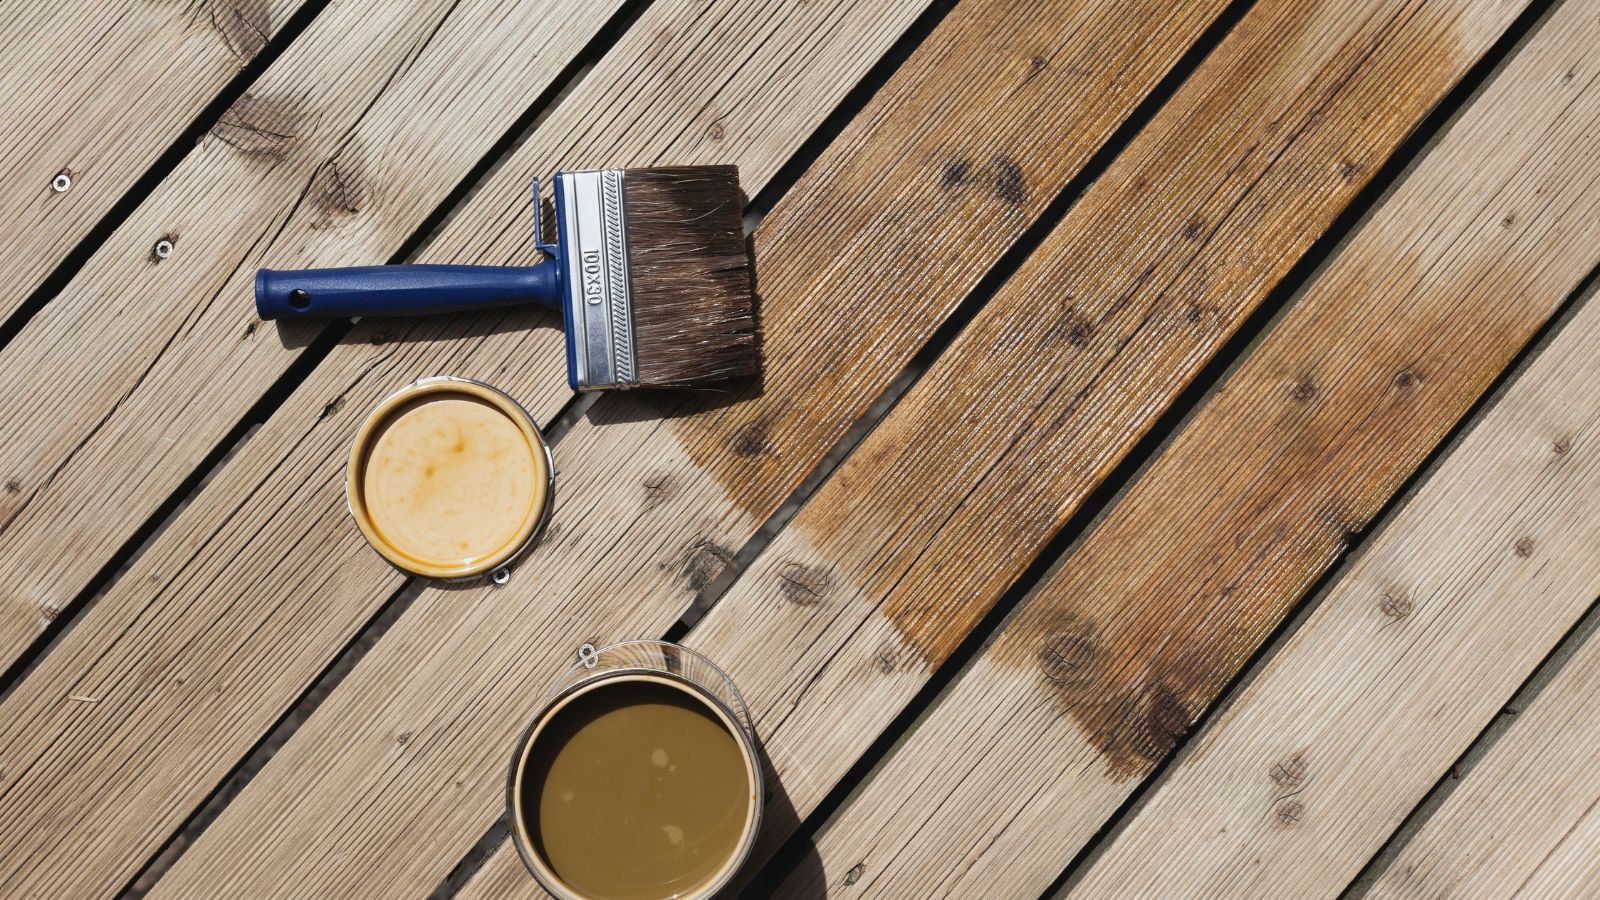 10 Best Brushes for Staining a Deck + How to Stain Without Marks